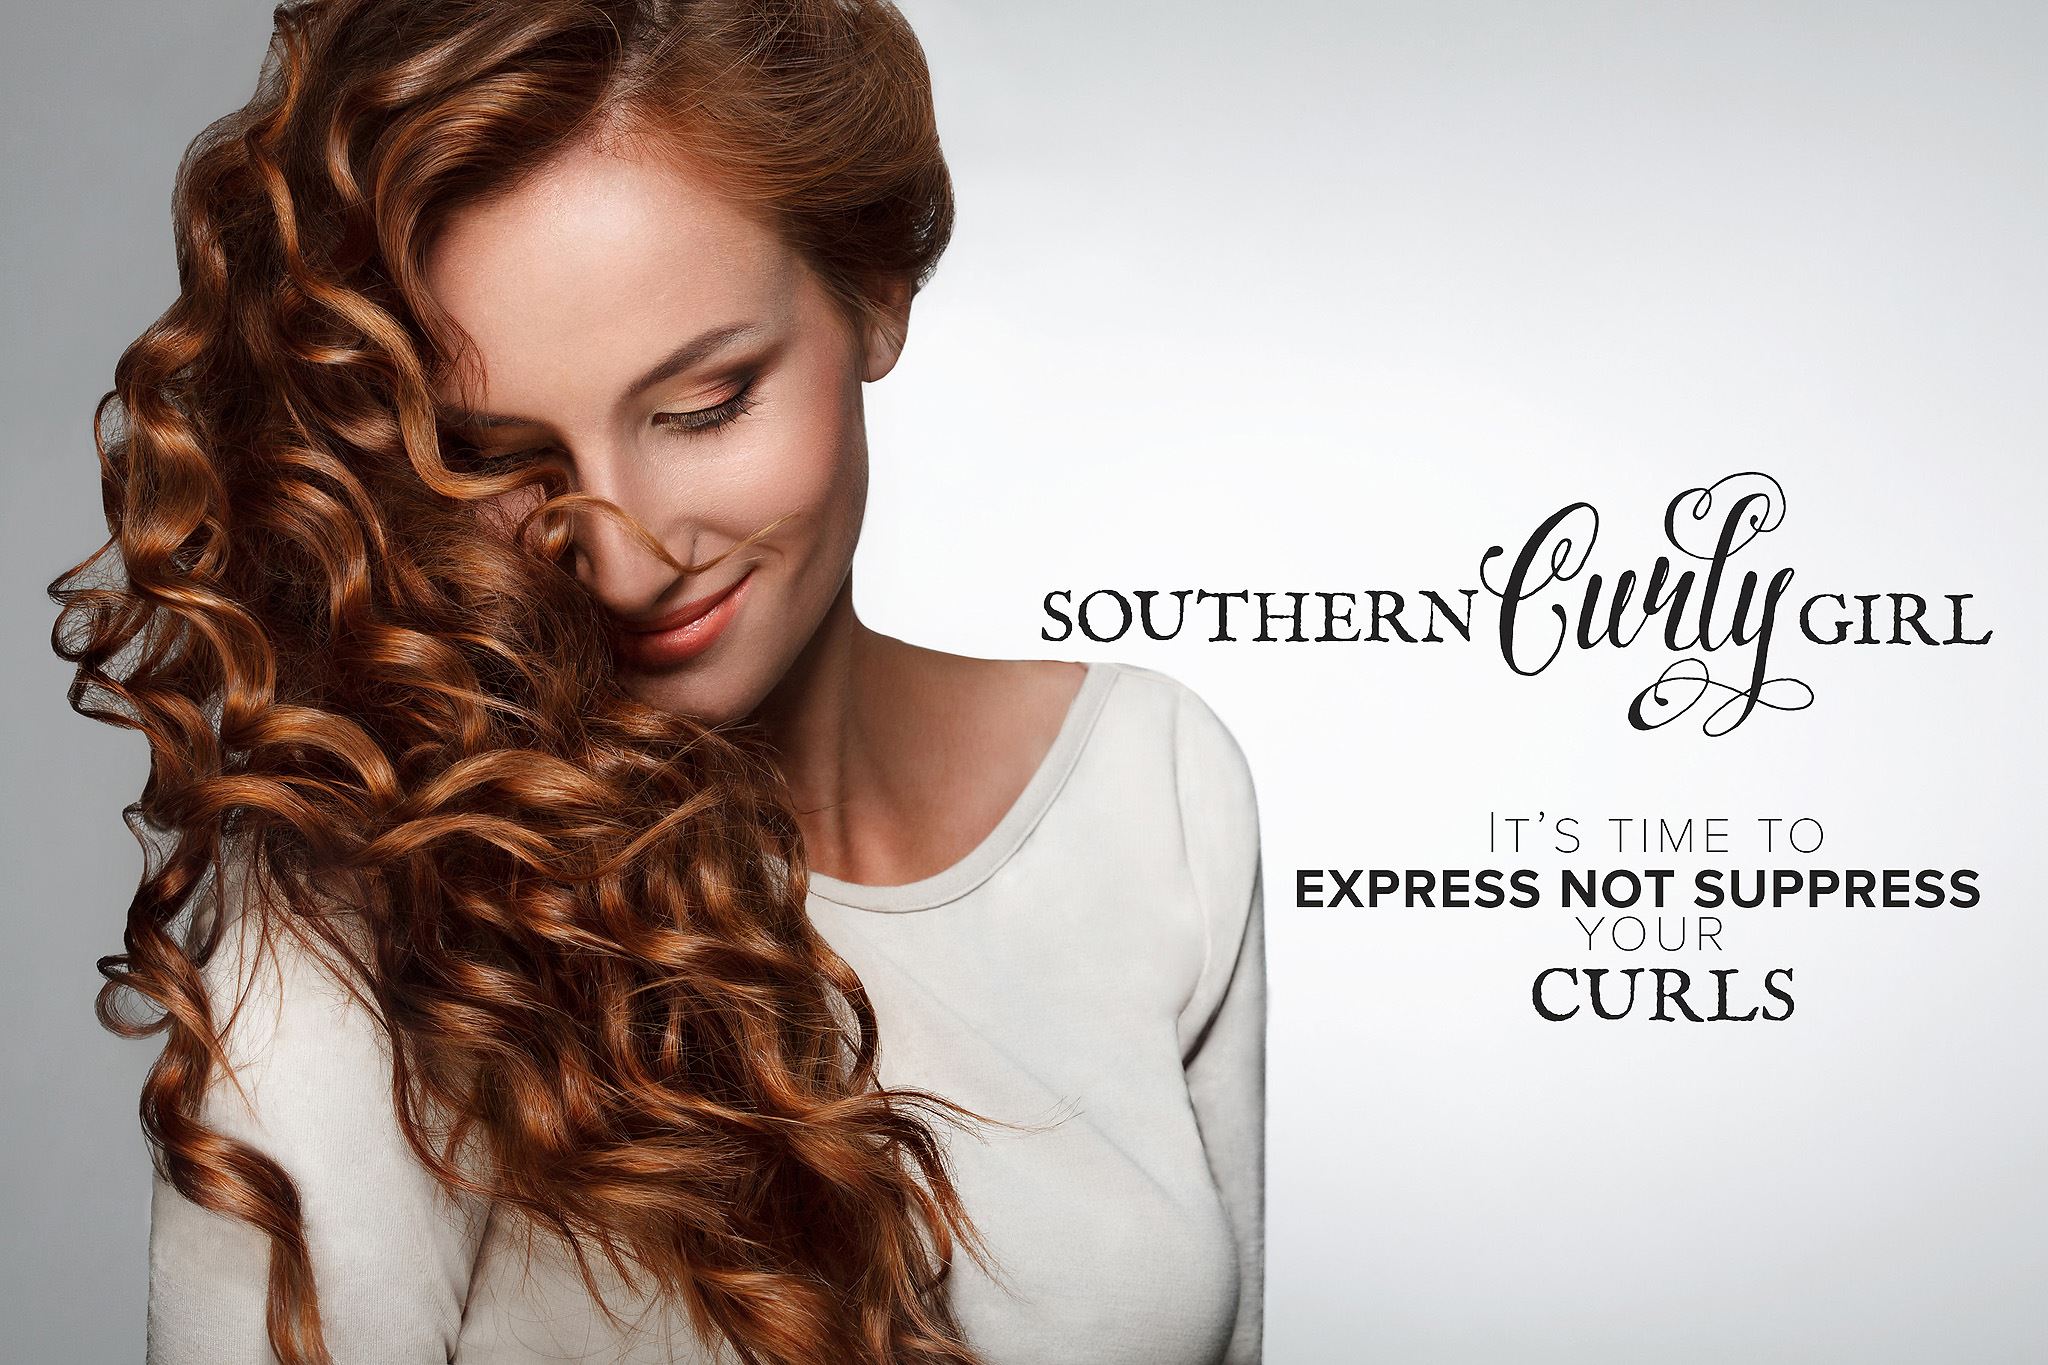 Company logo of Southern Curly Girl